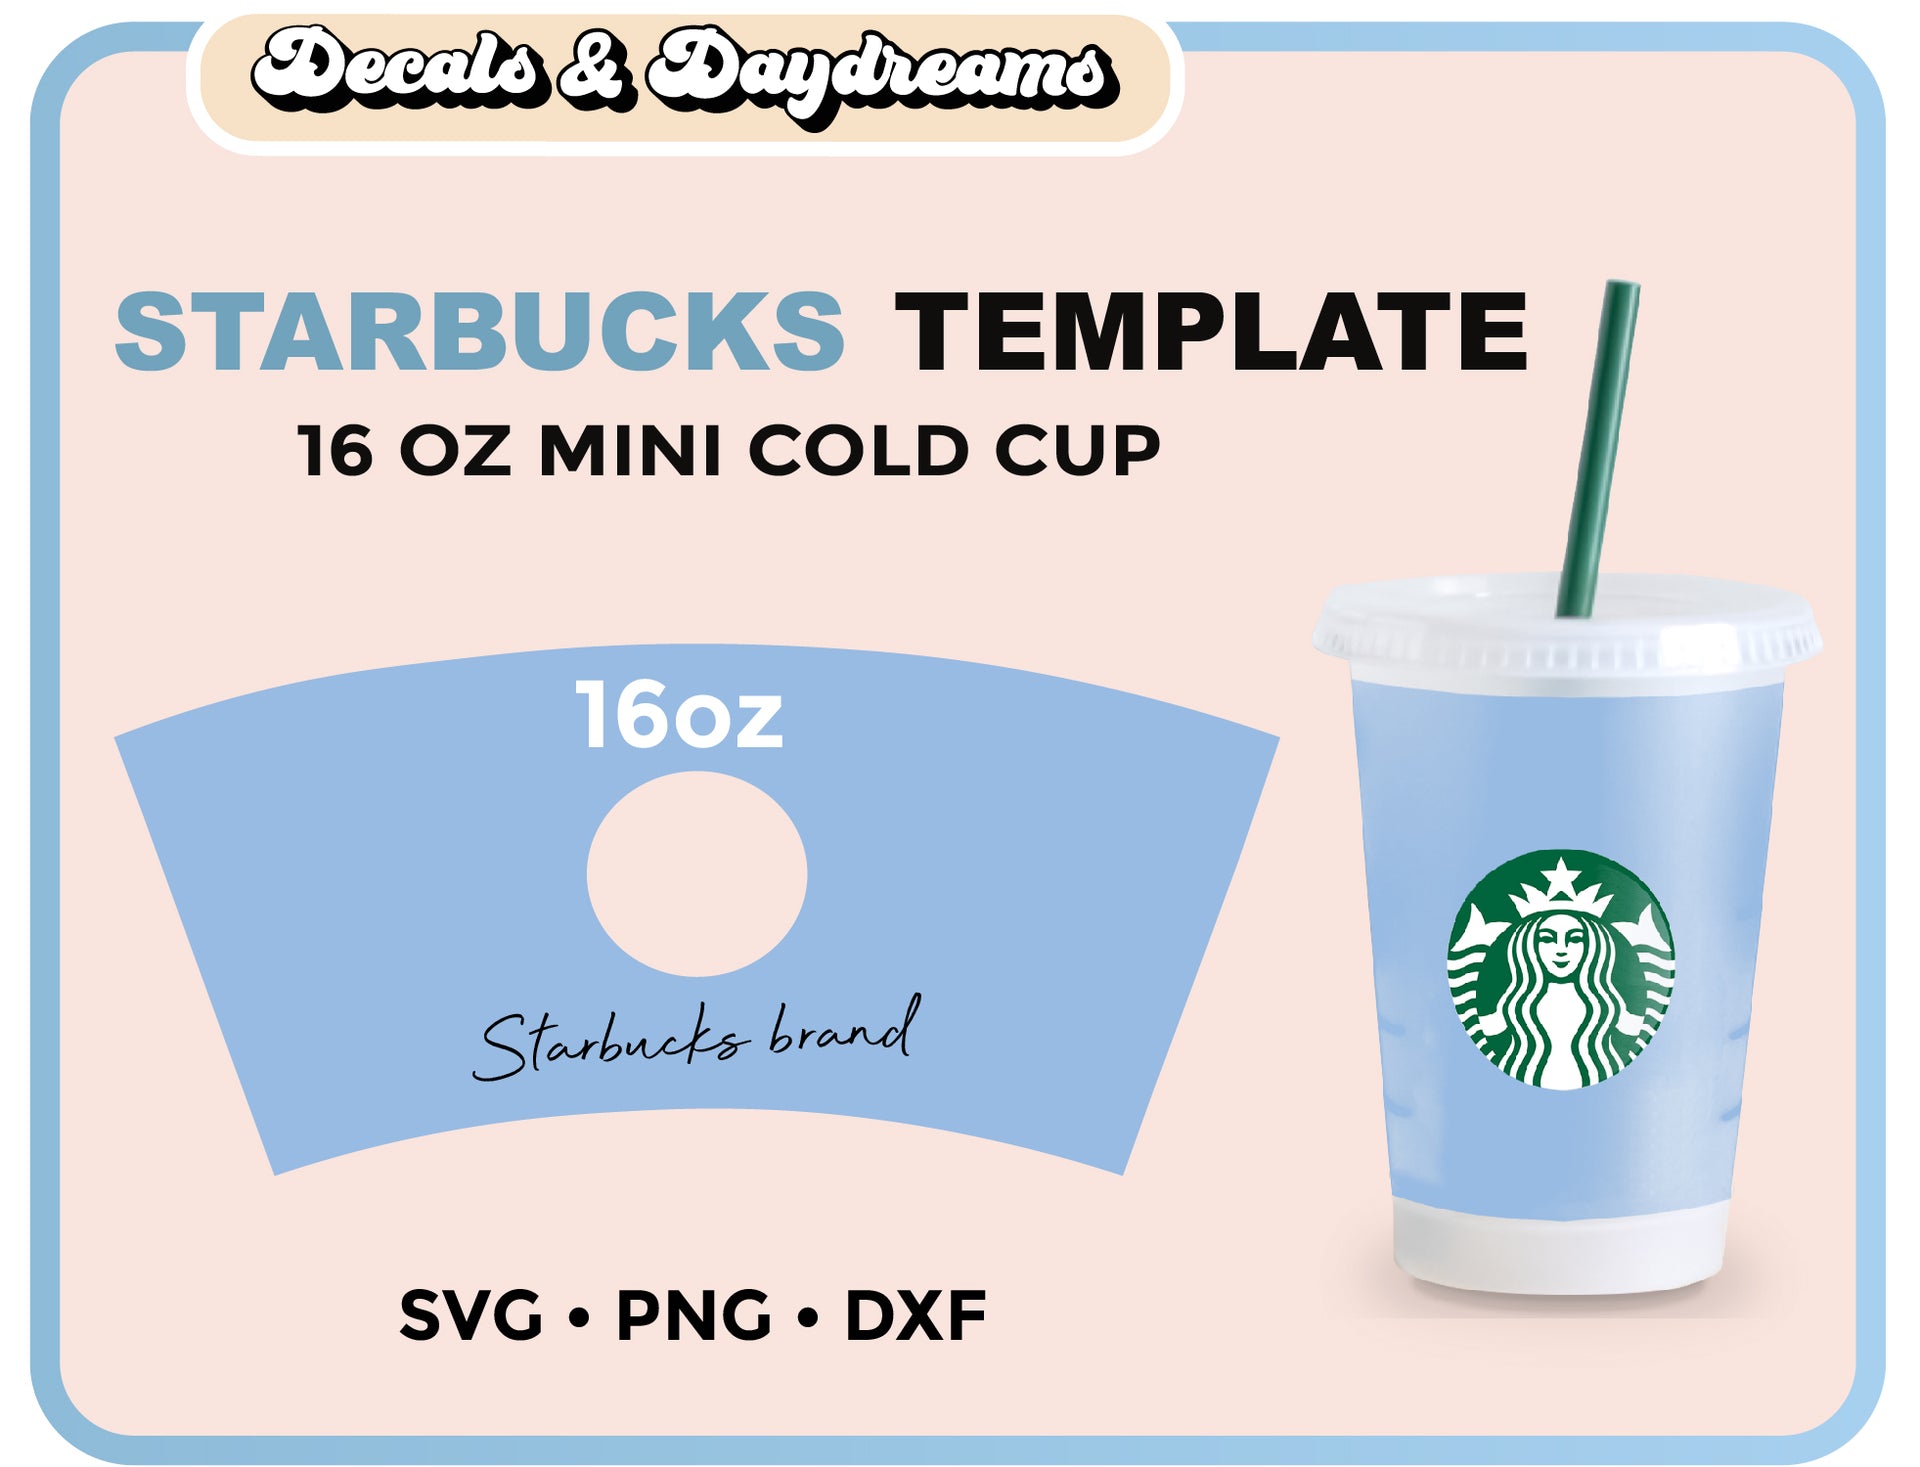 Free Starbucks Cup Wrap Template Download